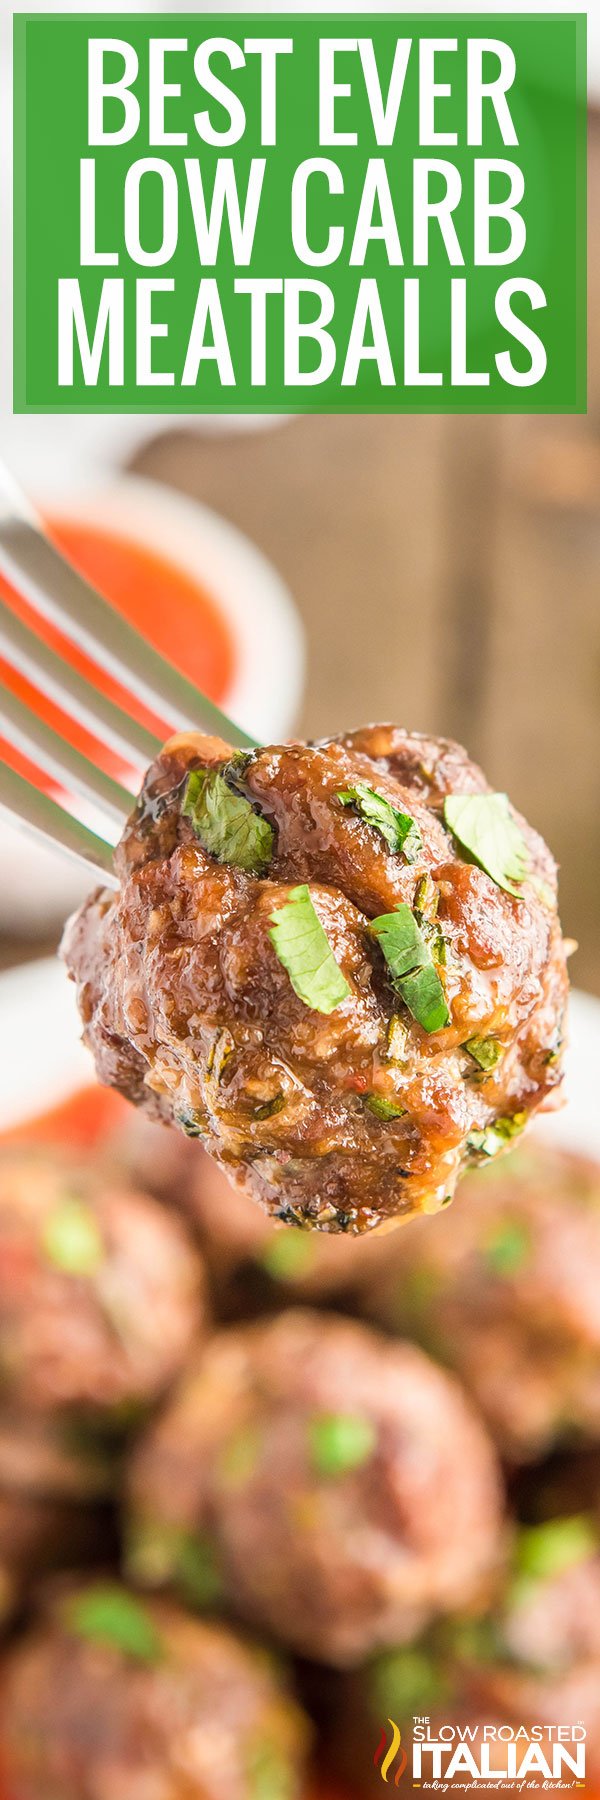 Best Ever Low Carb Meatballs - PIN